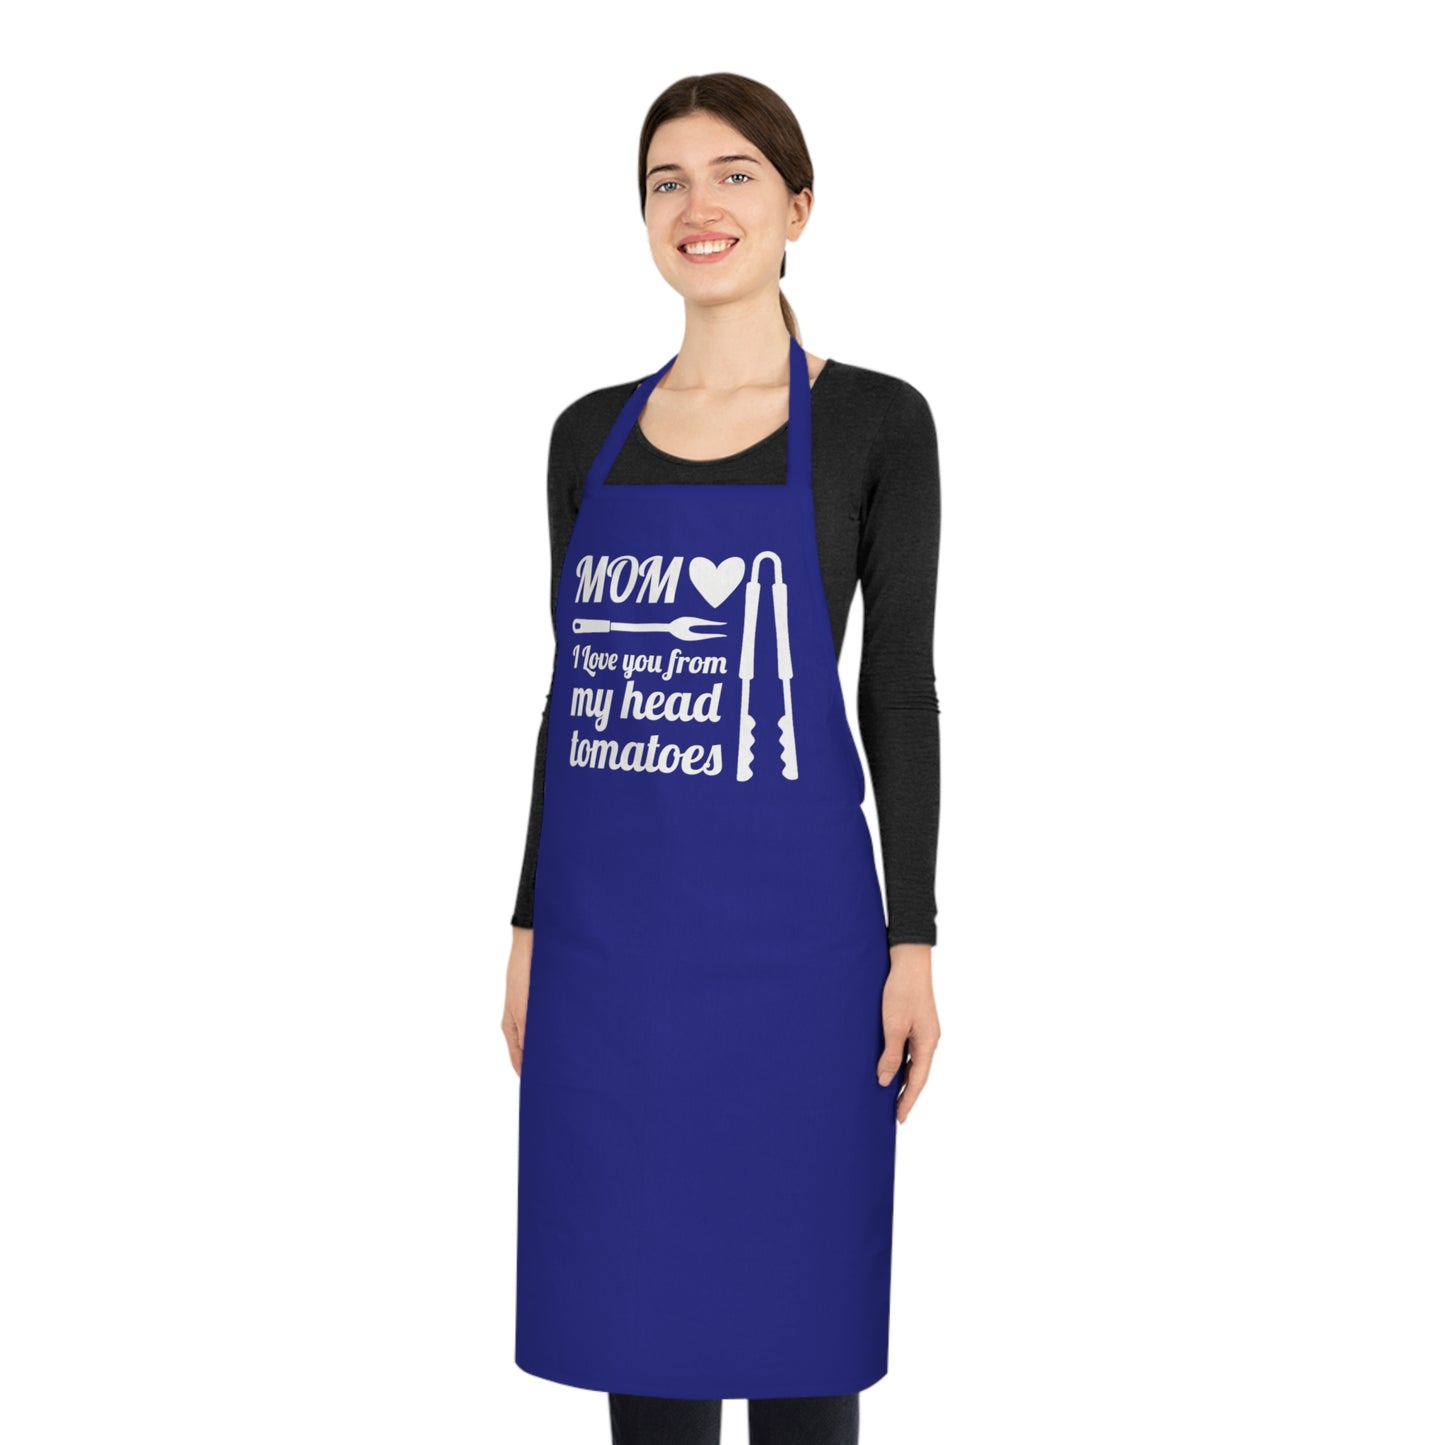 MOM, I love you from my head tomatoes, Cotton Apron